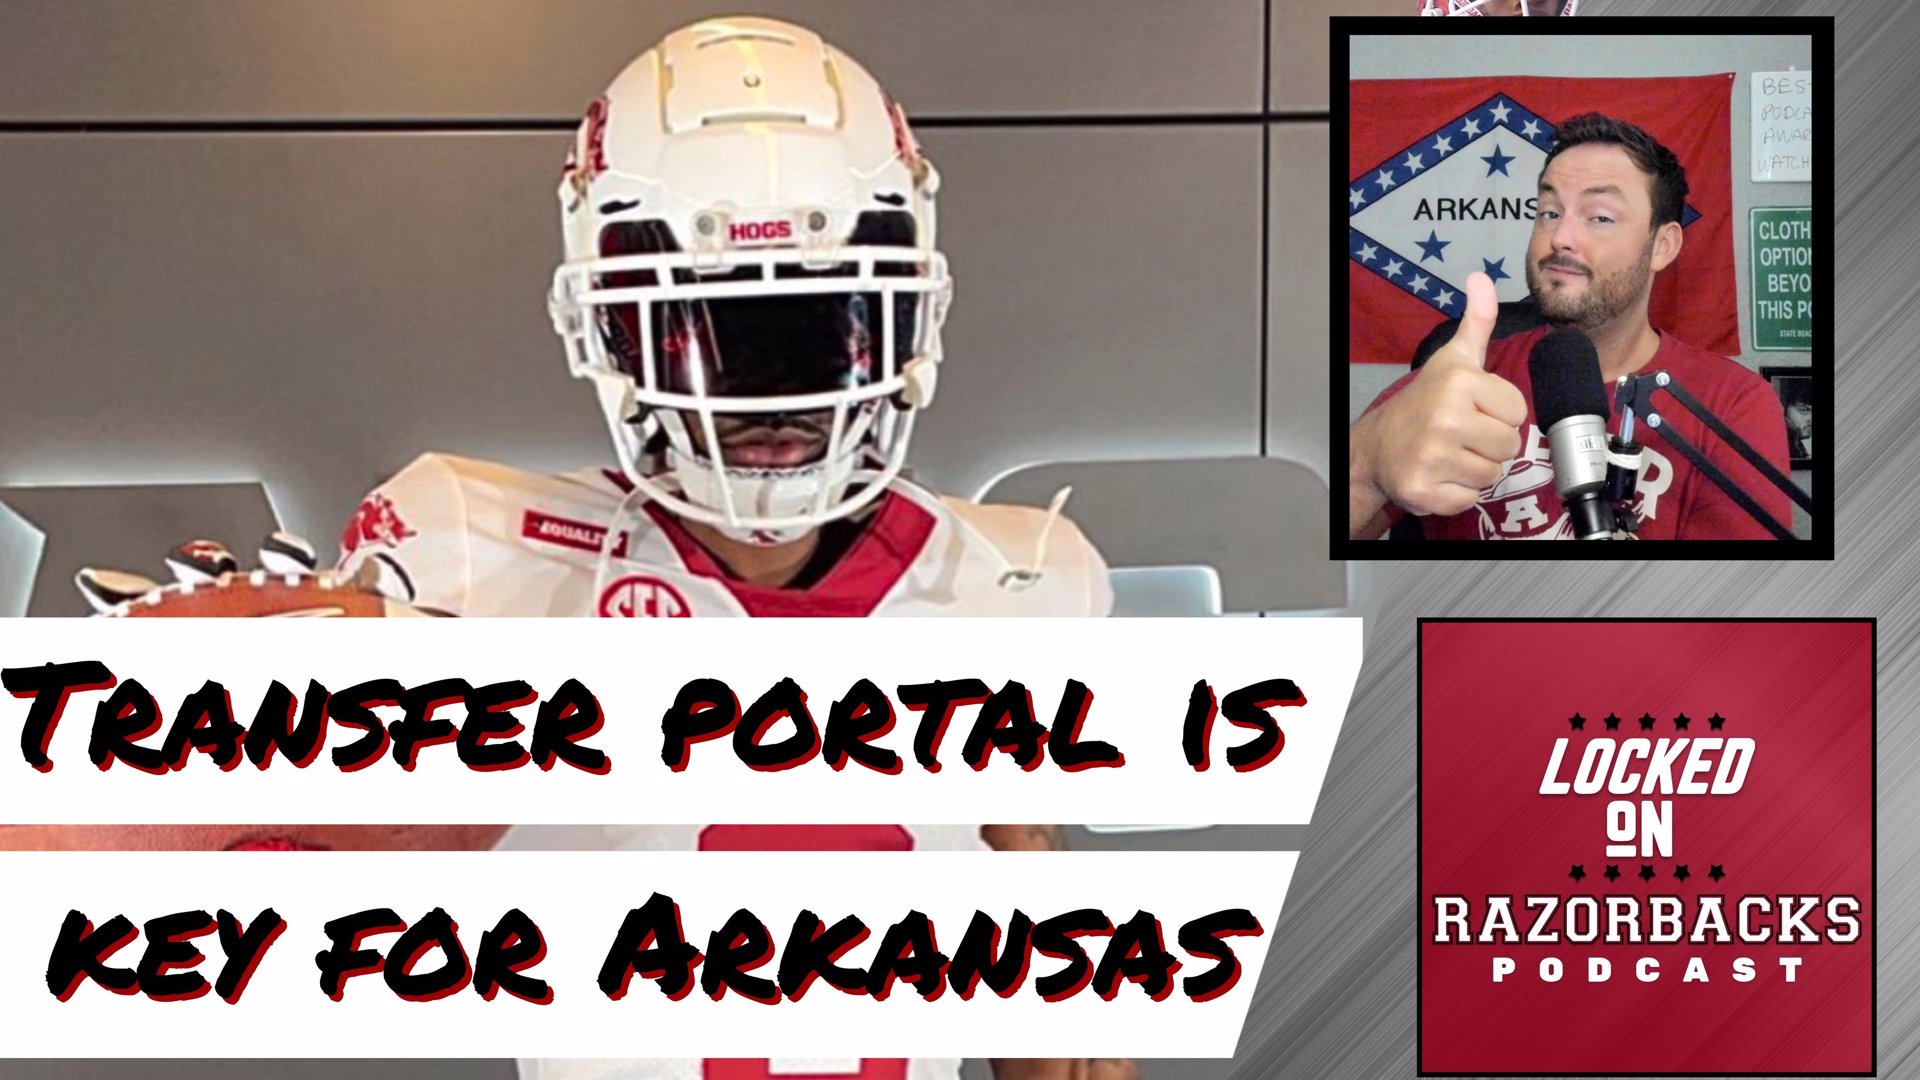 John Nabors discusses the reasons why the Razorbacks need the transfer portal in order to take that next step as a program.